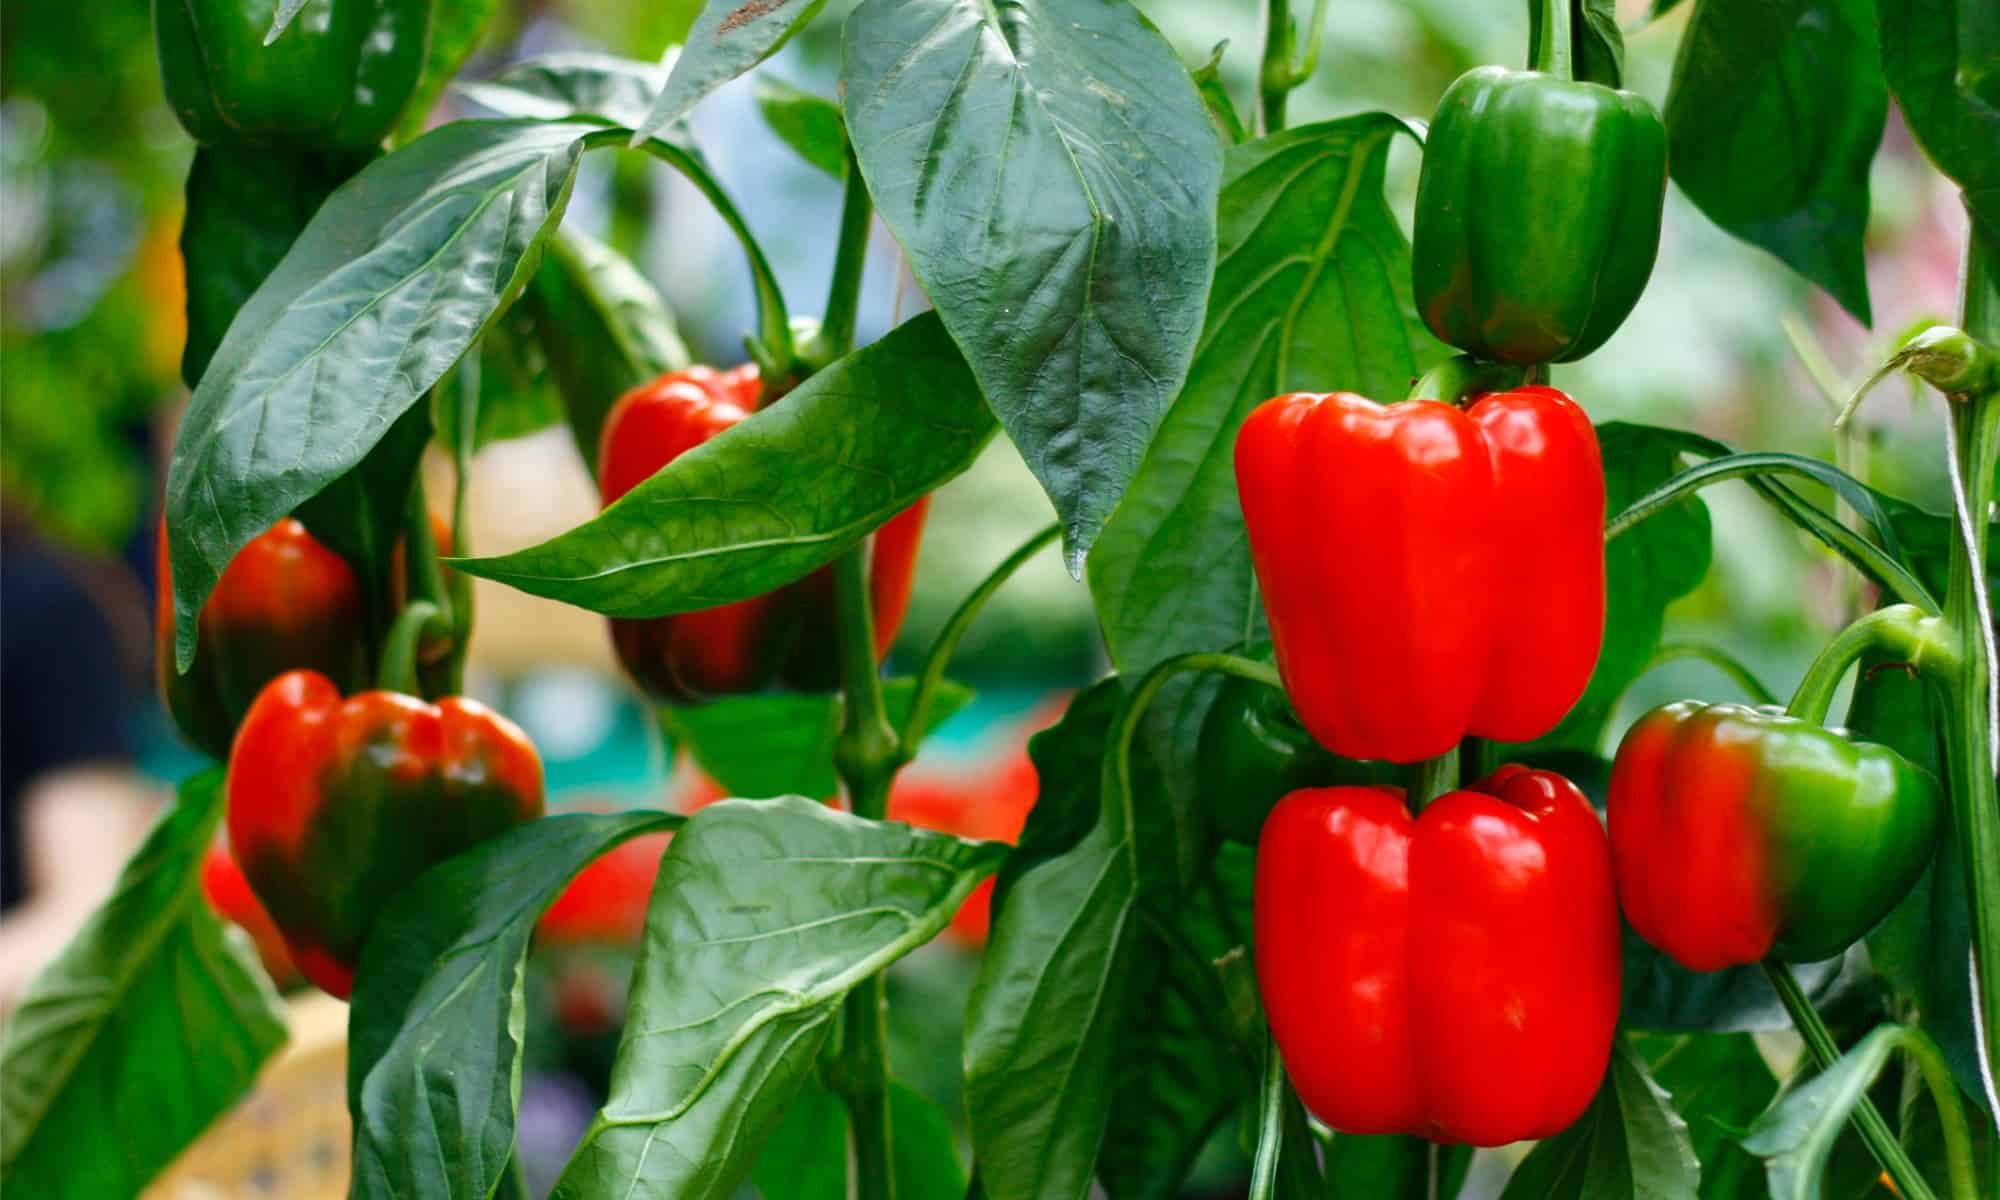 https://a-z-animals.com/media/2022/09/bell-peppers-tree-in-garden-picture-id1323318476.jpg